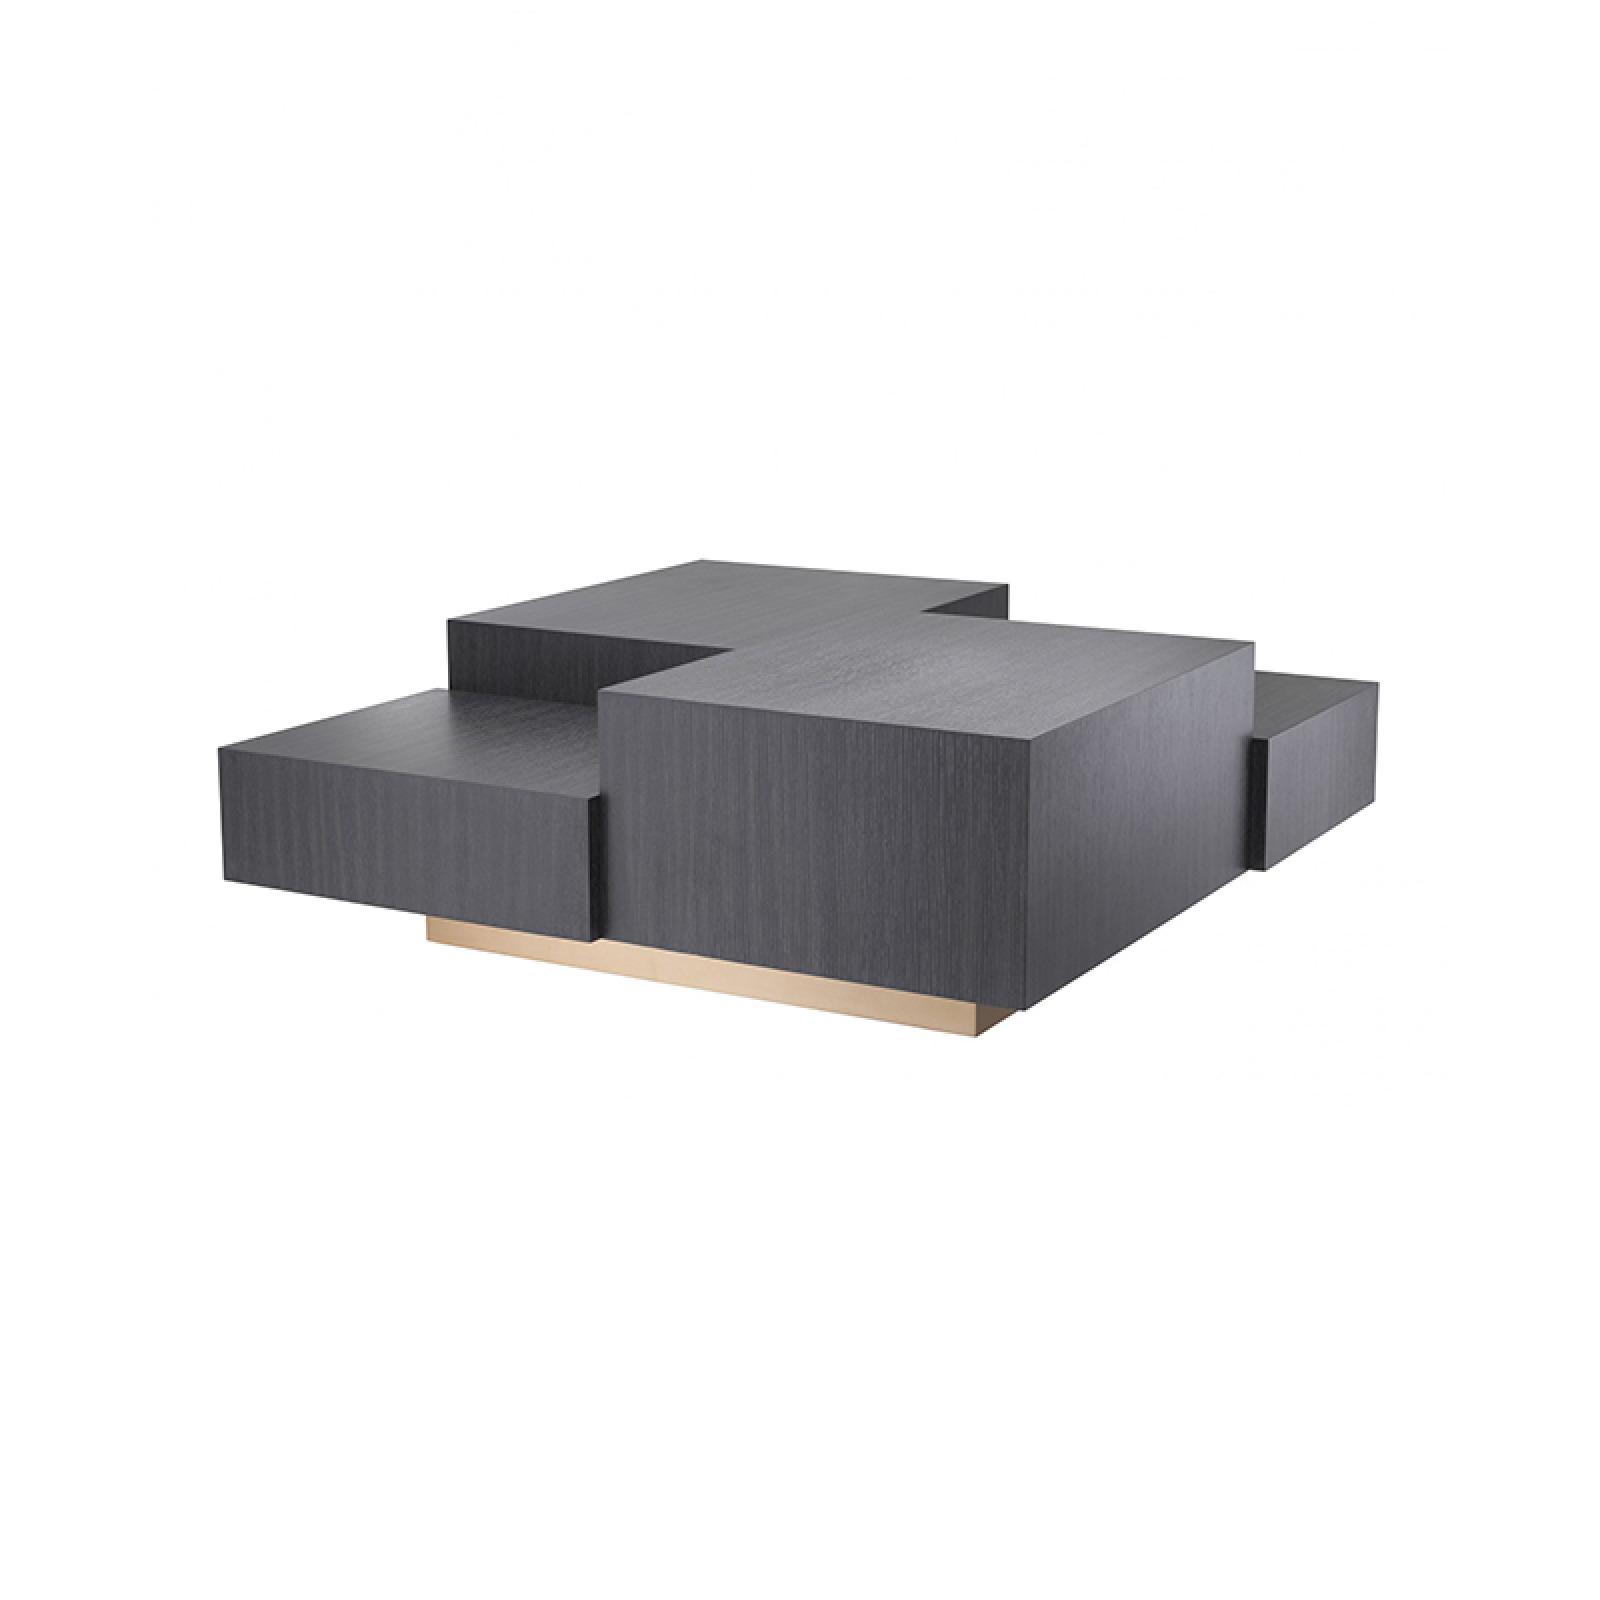 Nerone coffee table